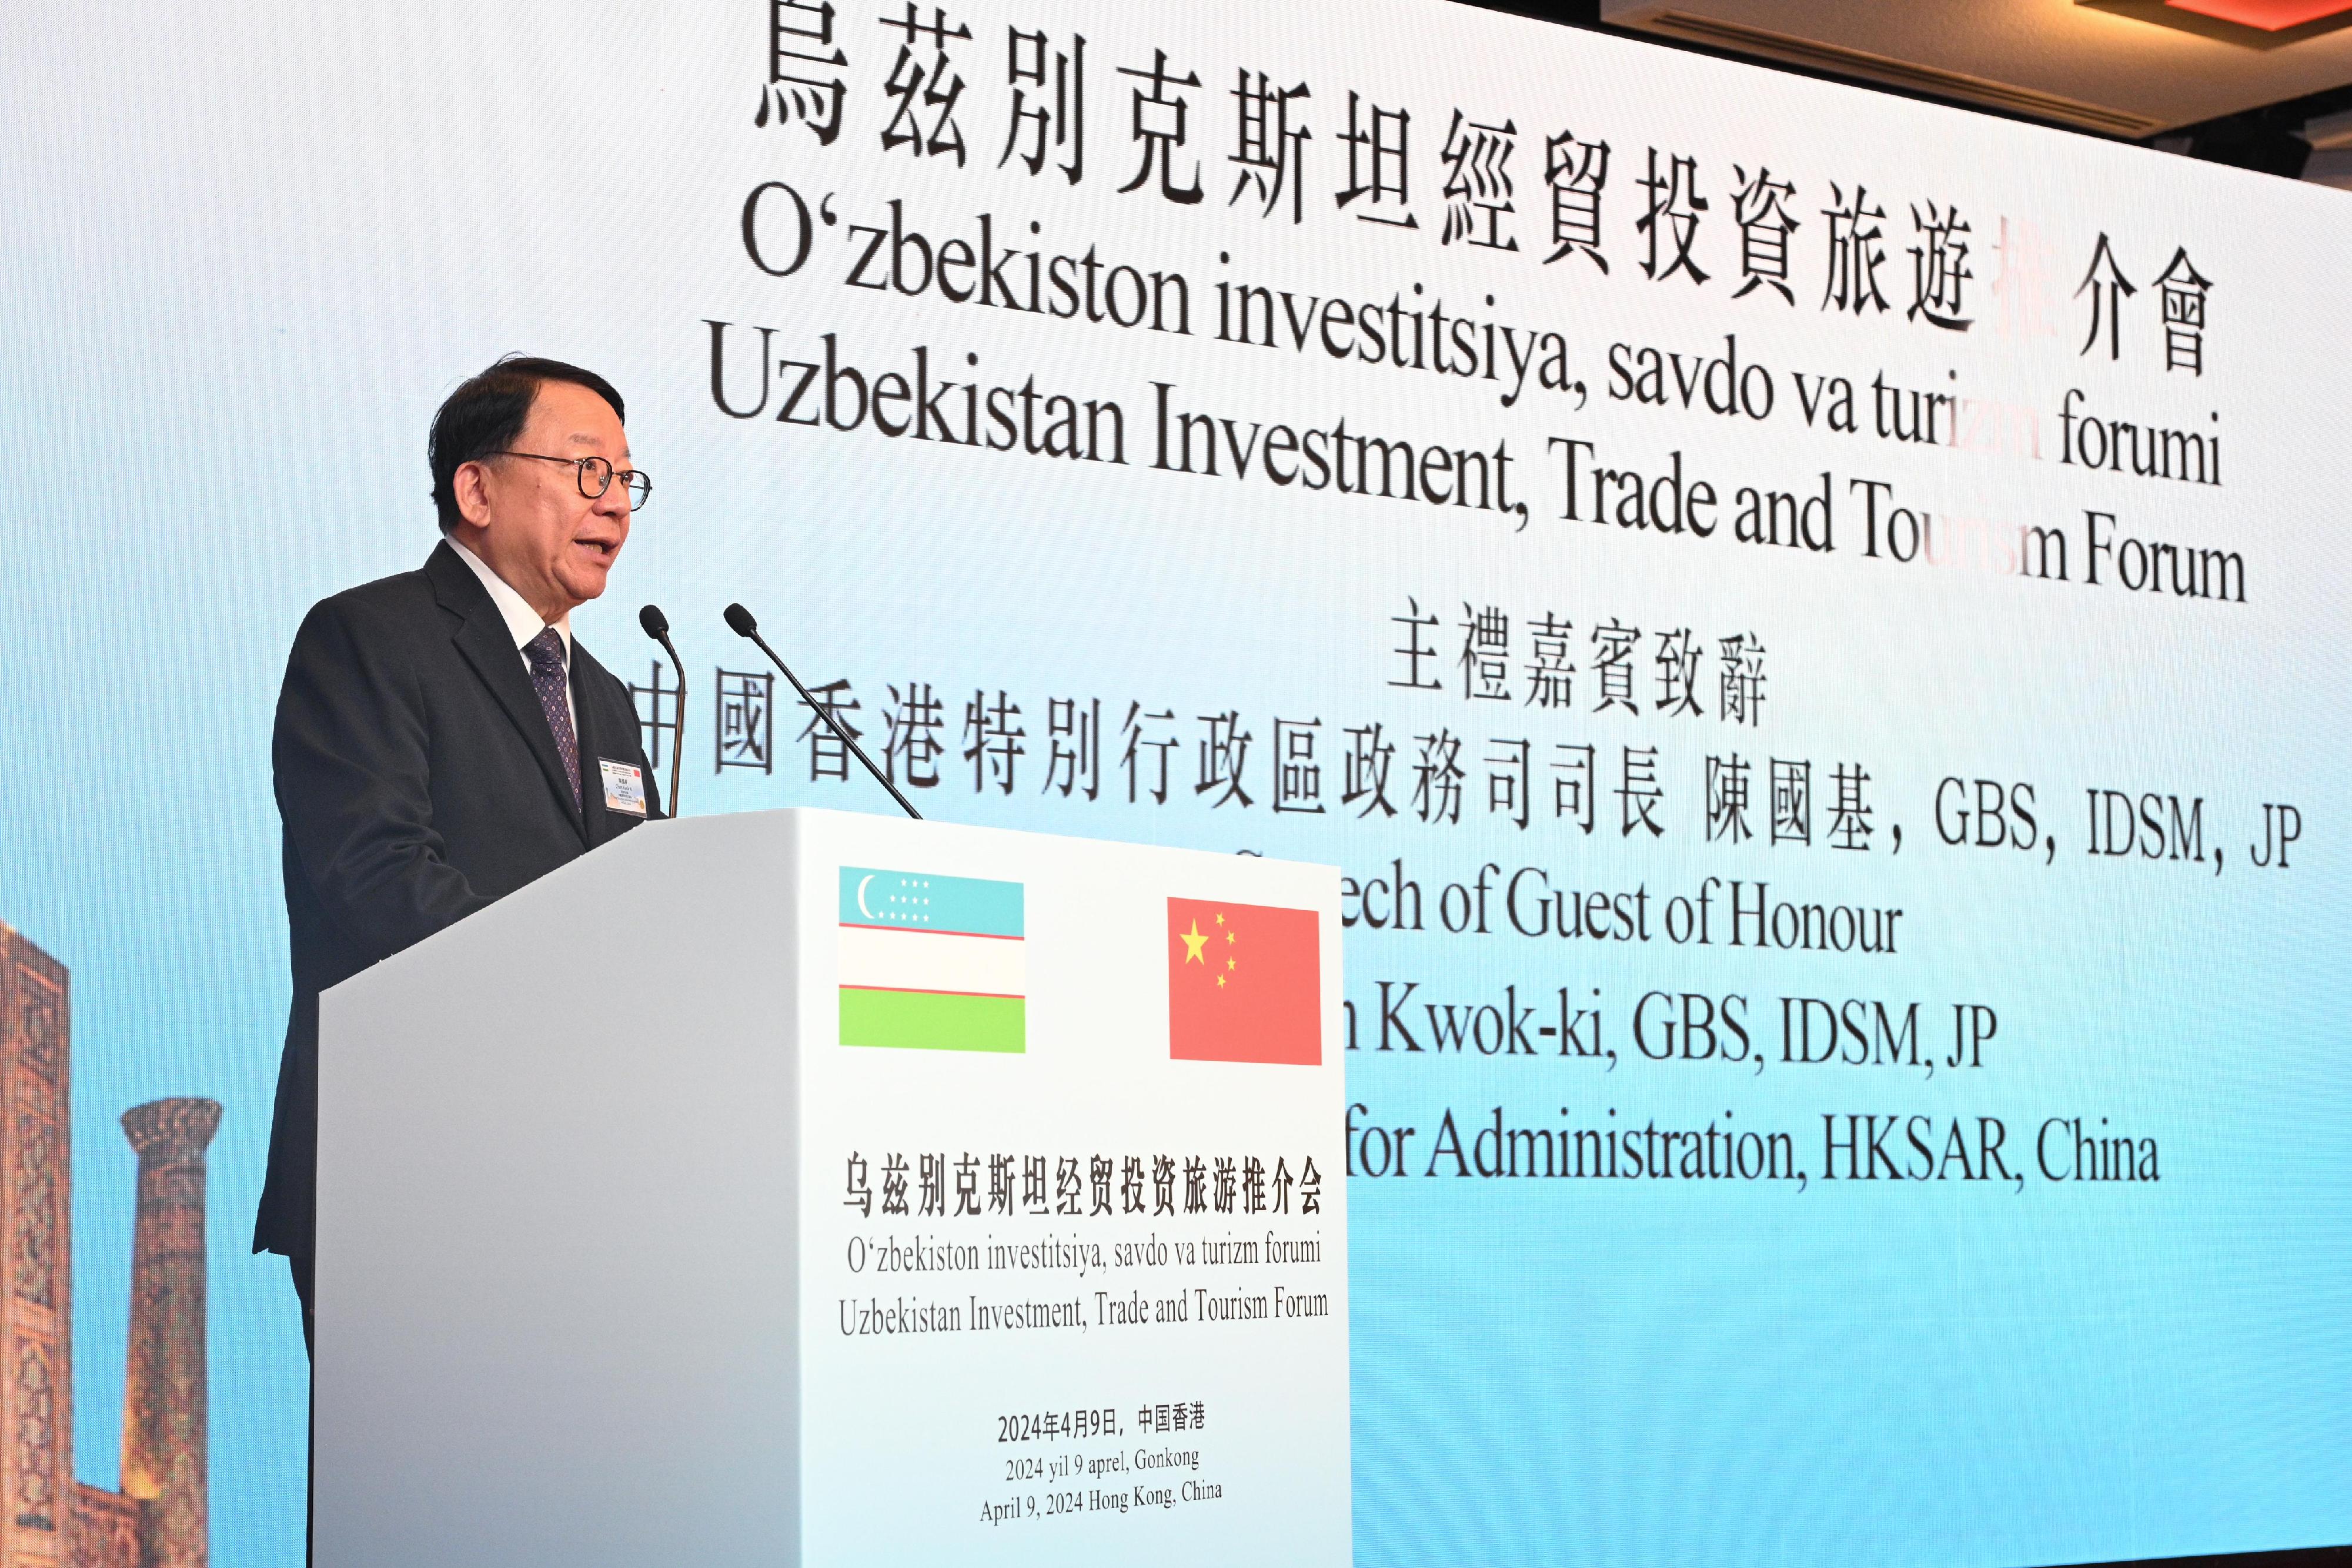 The Chief Secretary for Administration, Mr Chan Kwok-ki, speaks at the Uzbekistan Investment, Trade and Tourism Forum today (April 9).